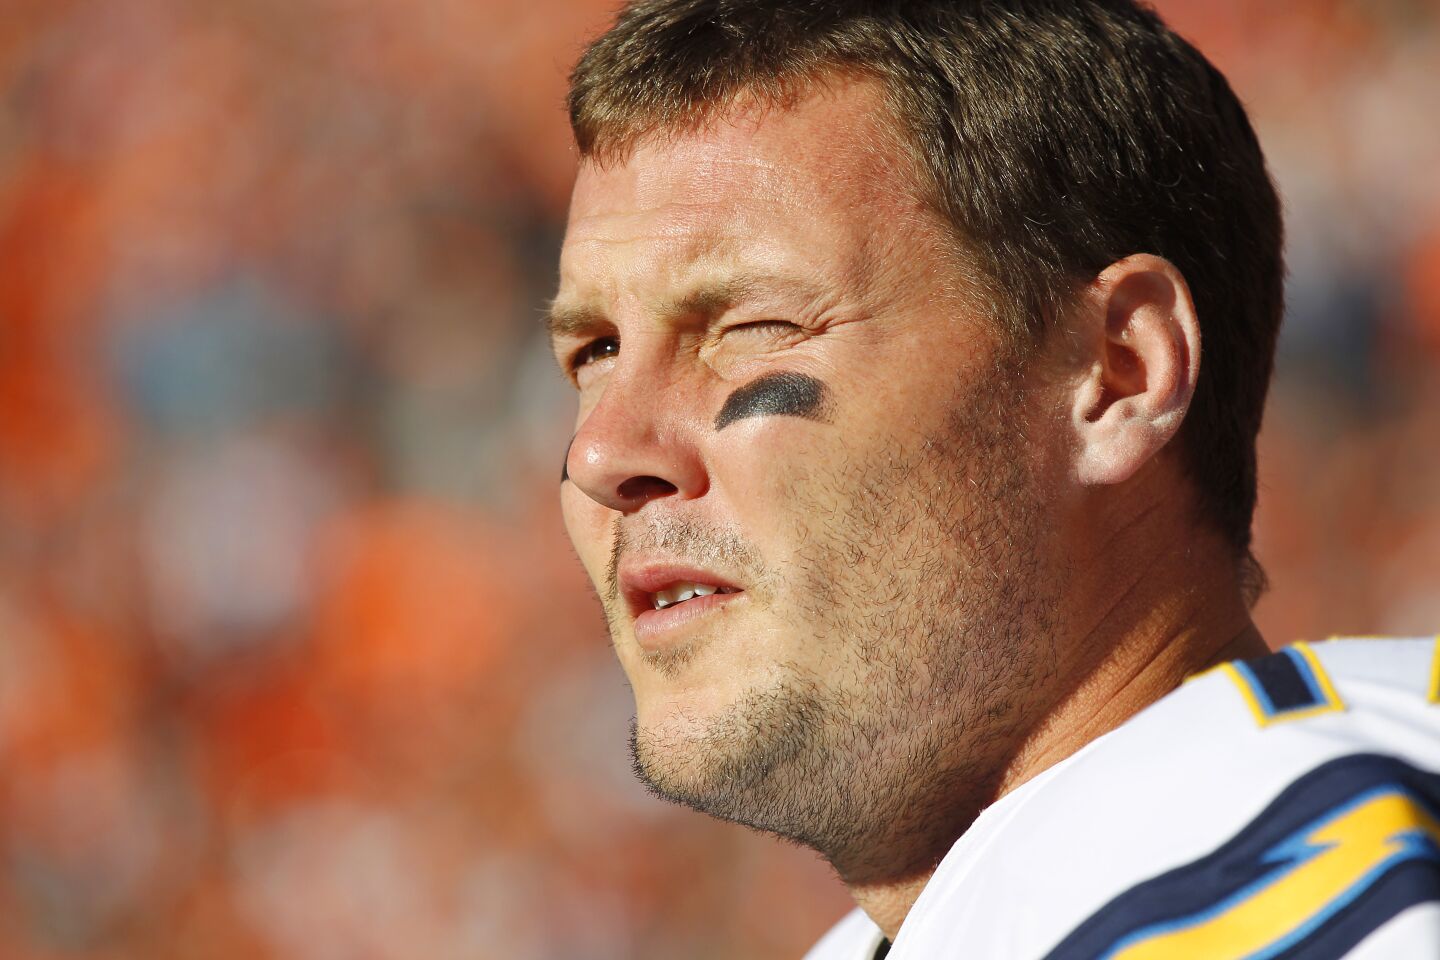 Chargers Philip Rivers looks on during a game against the Broncos on Jan. 3, 2106.